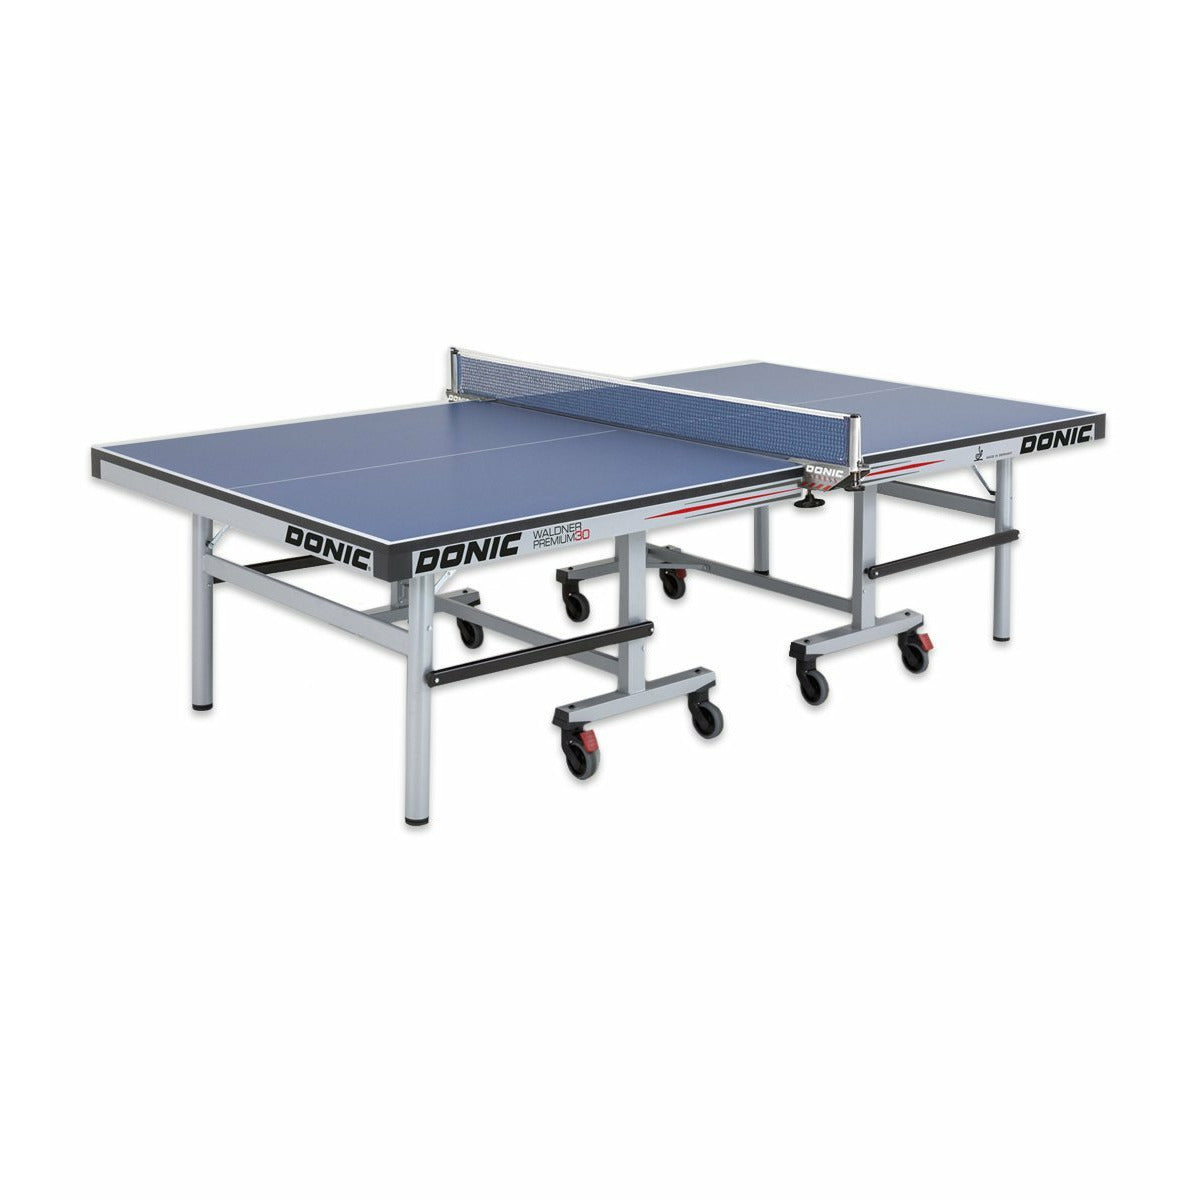 Donic Waldner Premium 30 Table Tennis Table